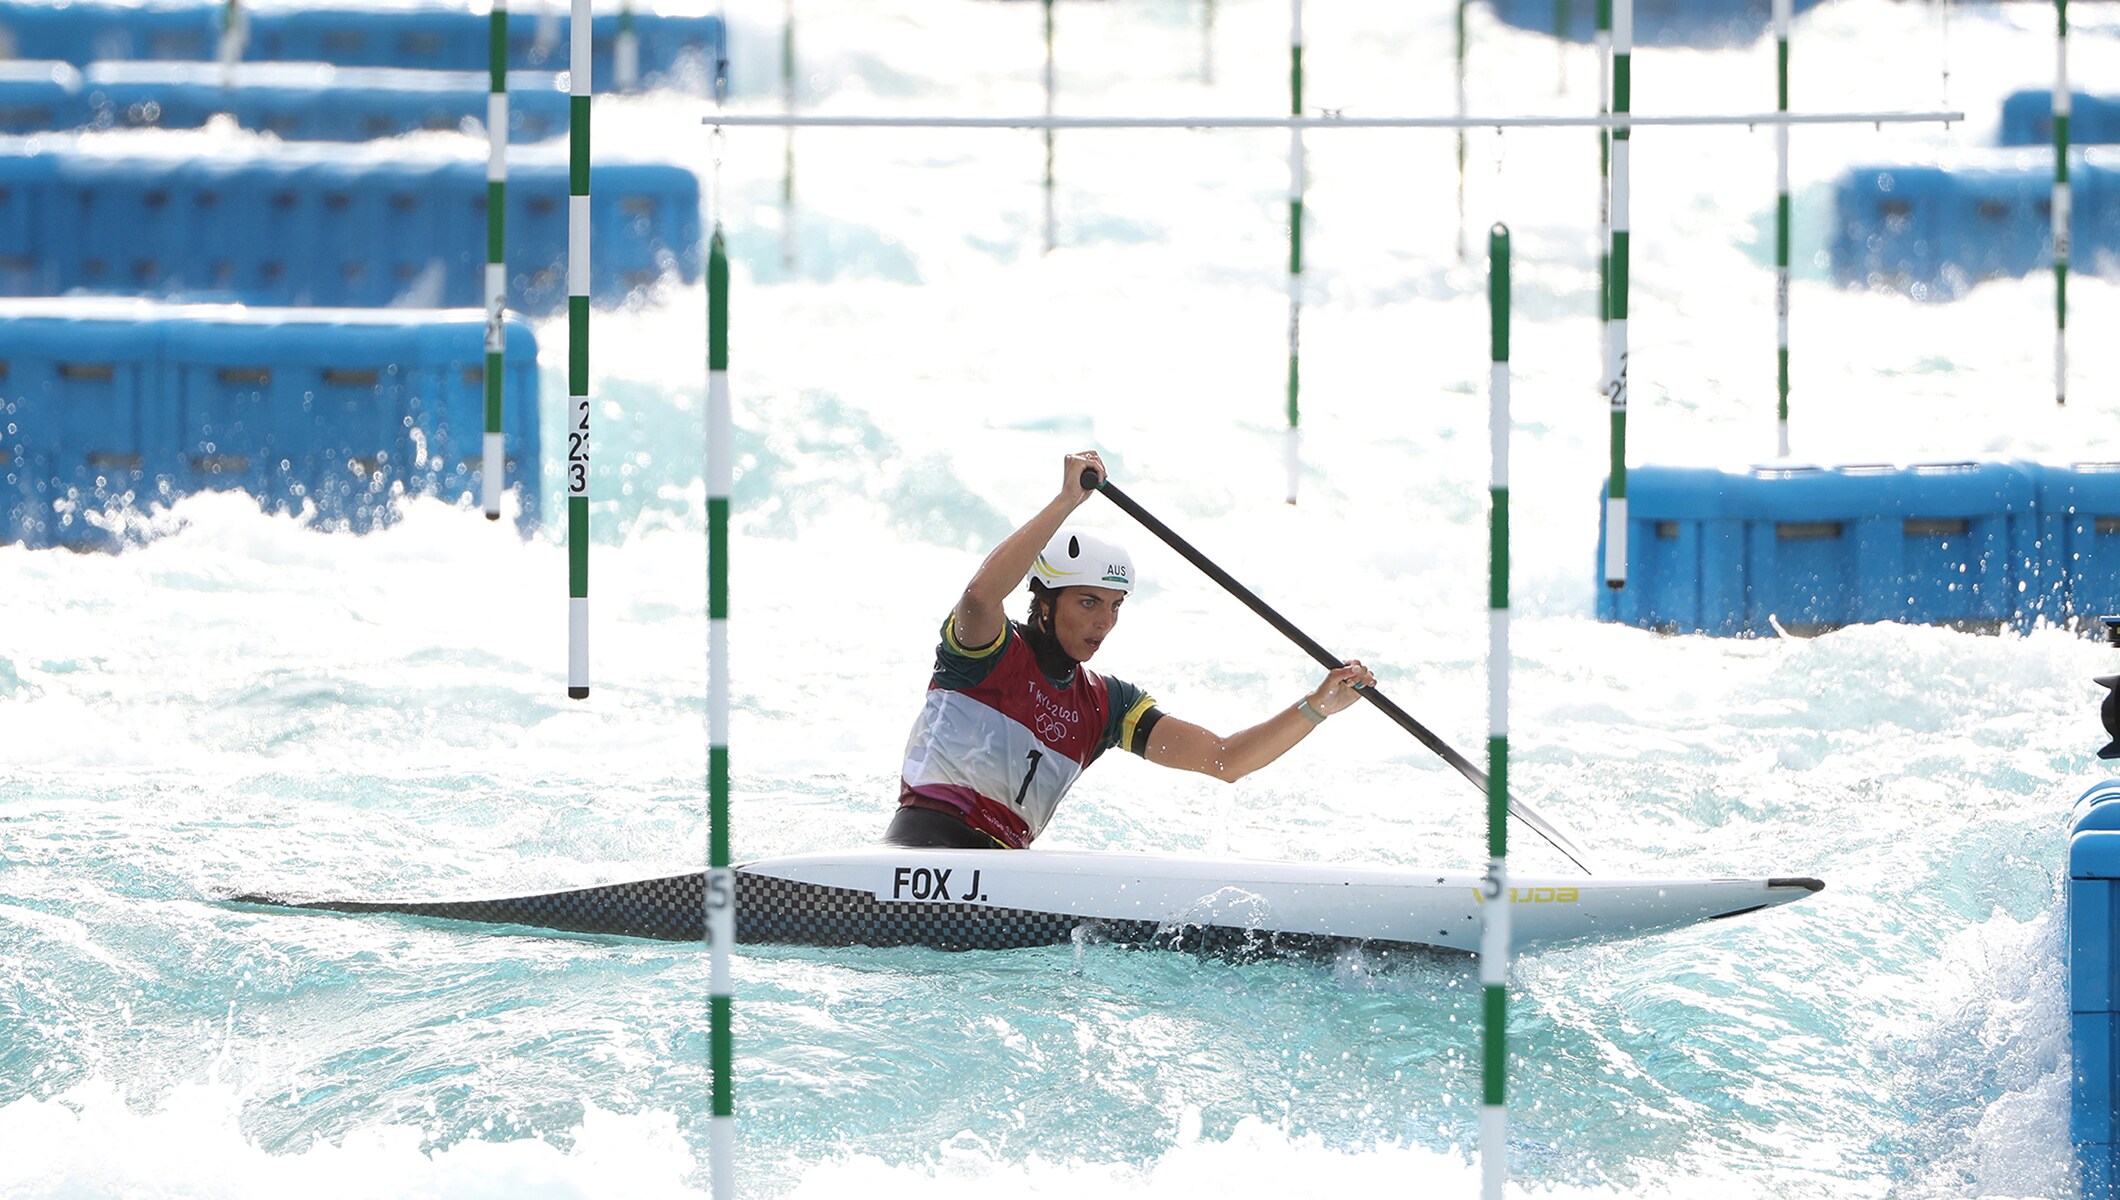 Jessica Fox of Team Australia competes during the Women's Canoe Slalom Final on day six of the Tokyo 2020 Olympic Games